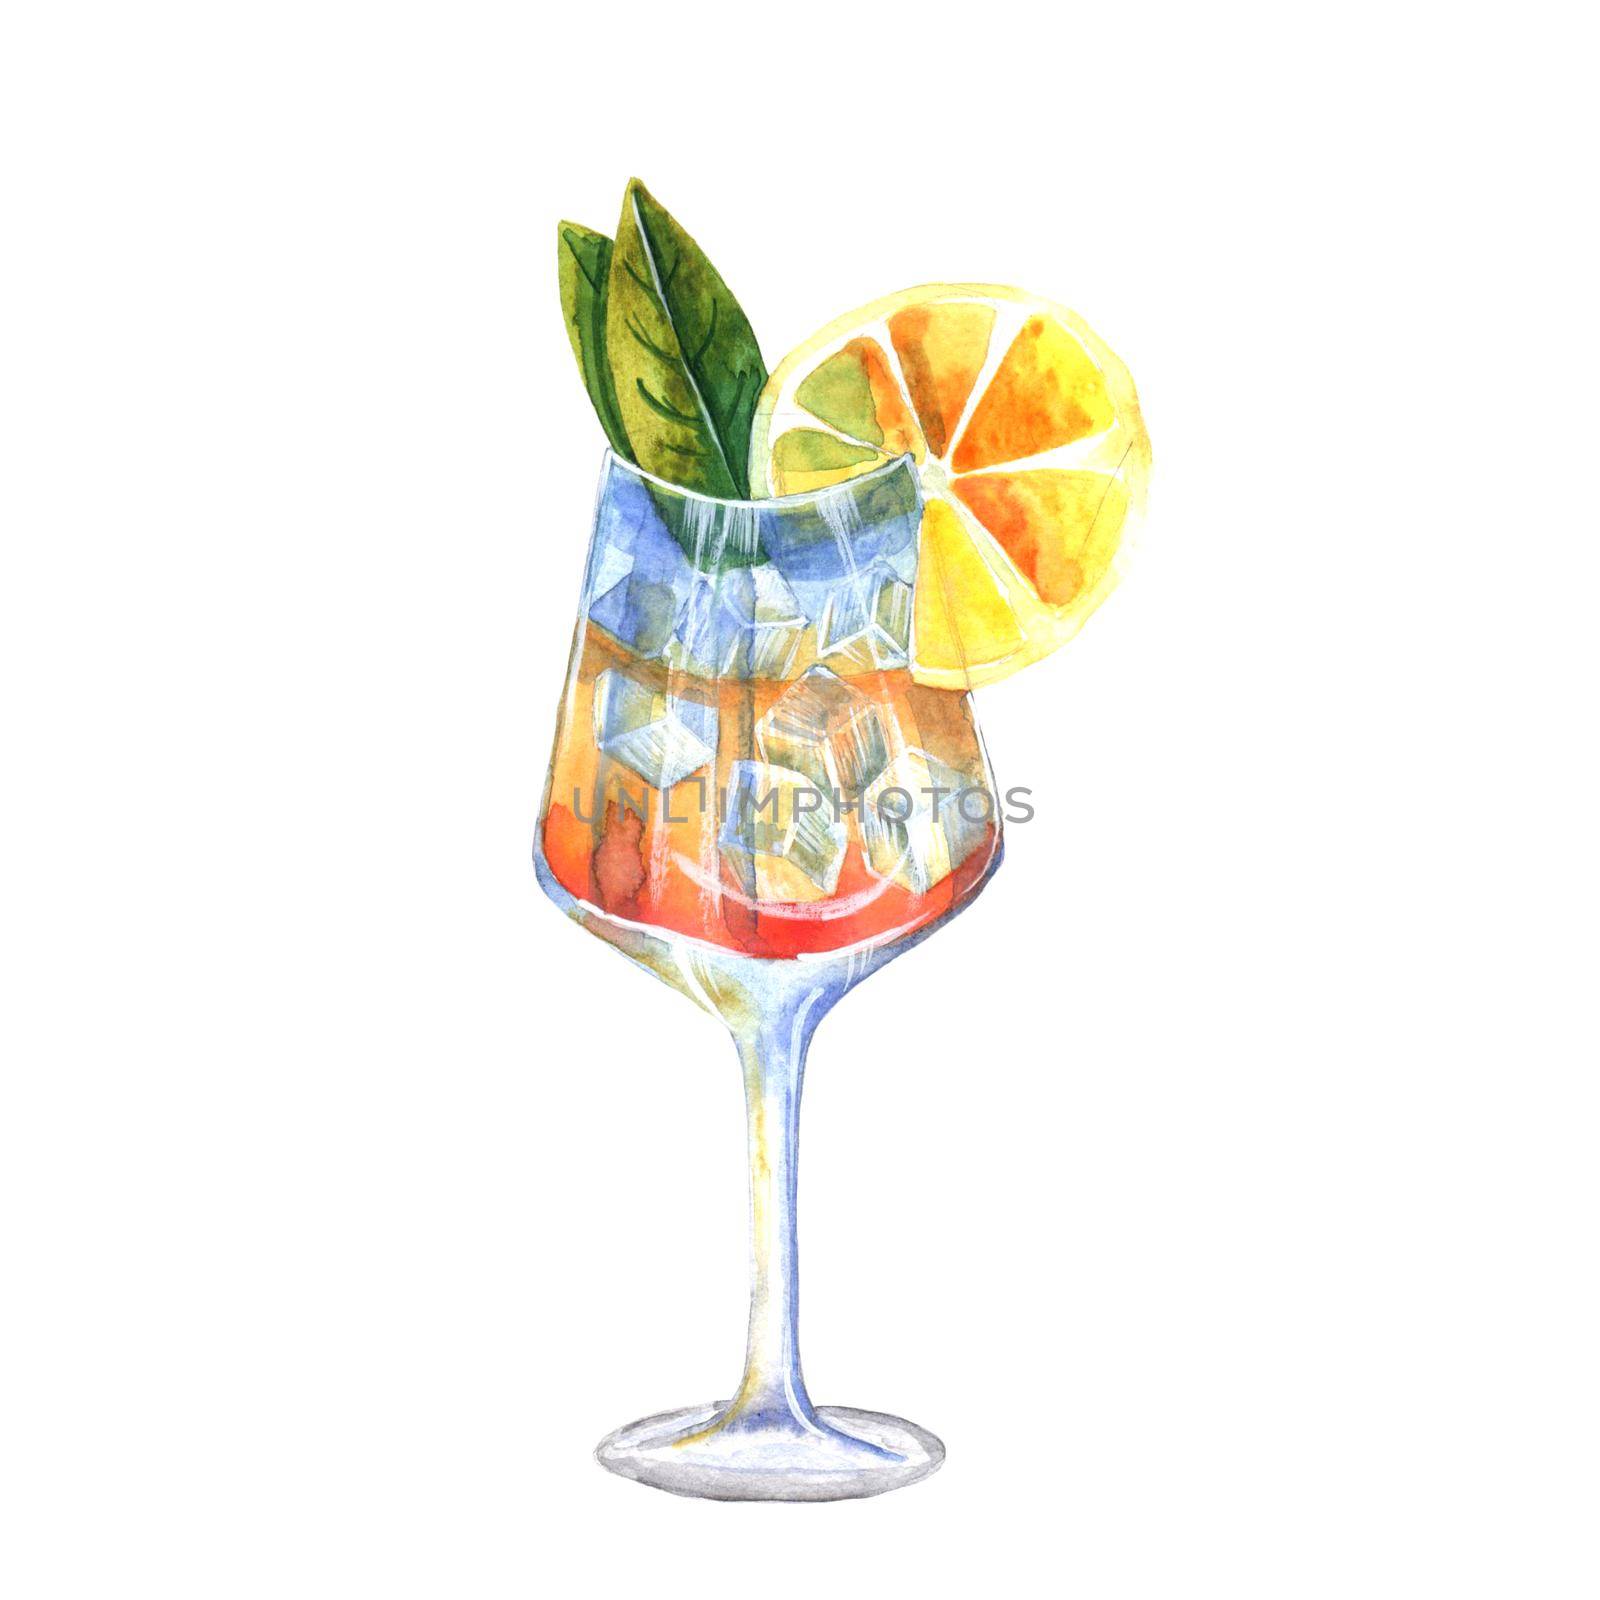 Watercolor alcohol cocktail with lemon, ice and mint. Hand drawn isolated summer drink glass on white background. Artistic illustration.